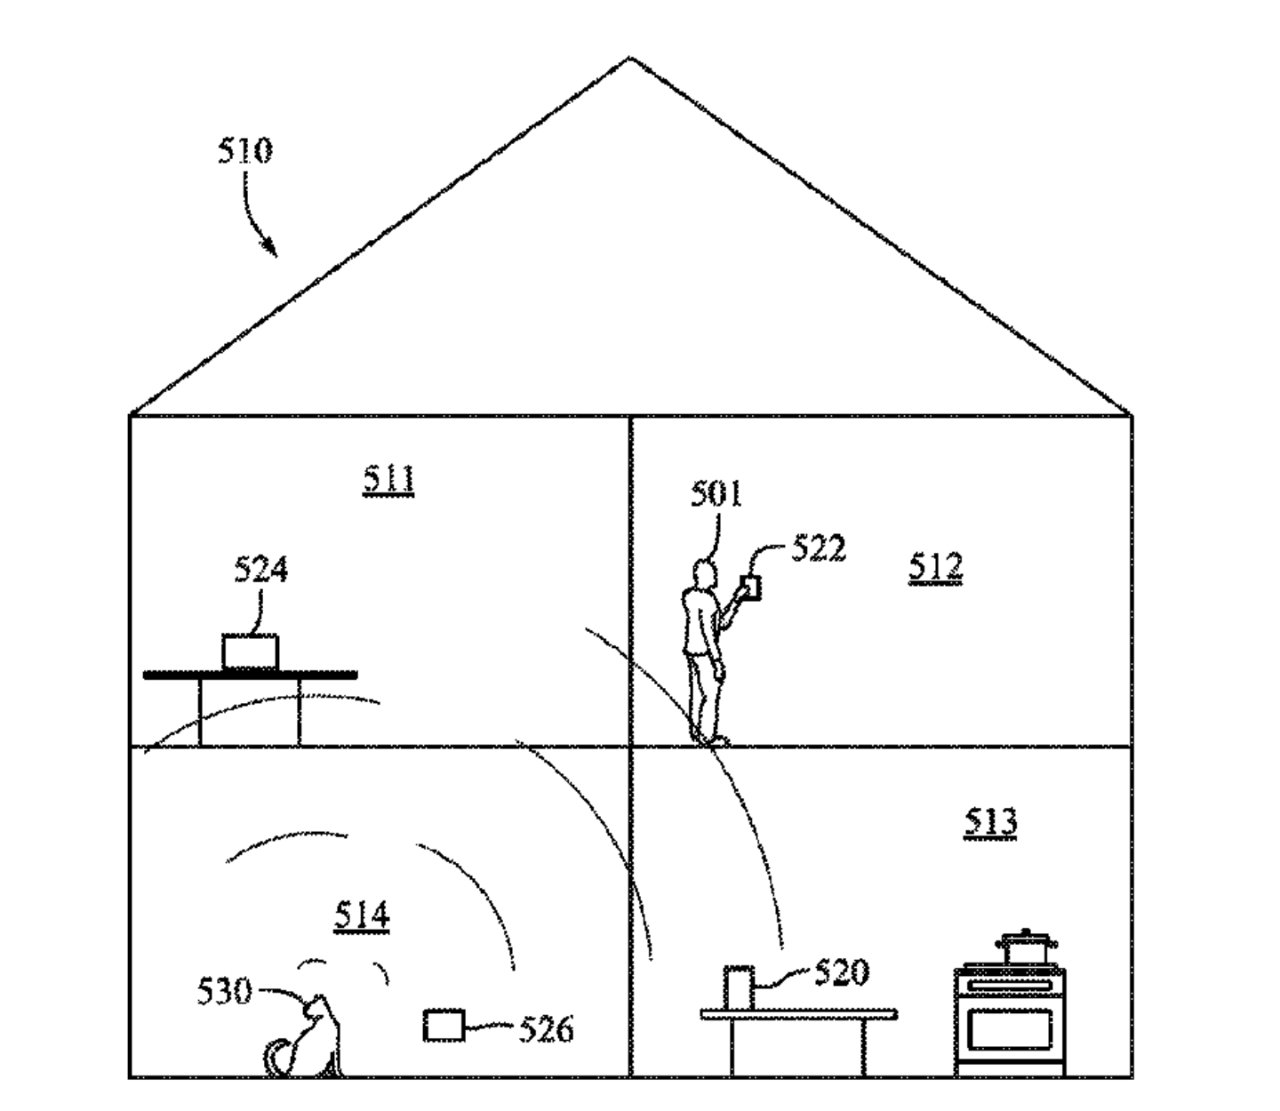 Schematic drawing of a person inside a house, interacting with various home automation devices labeled with numbers.